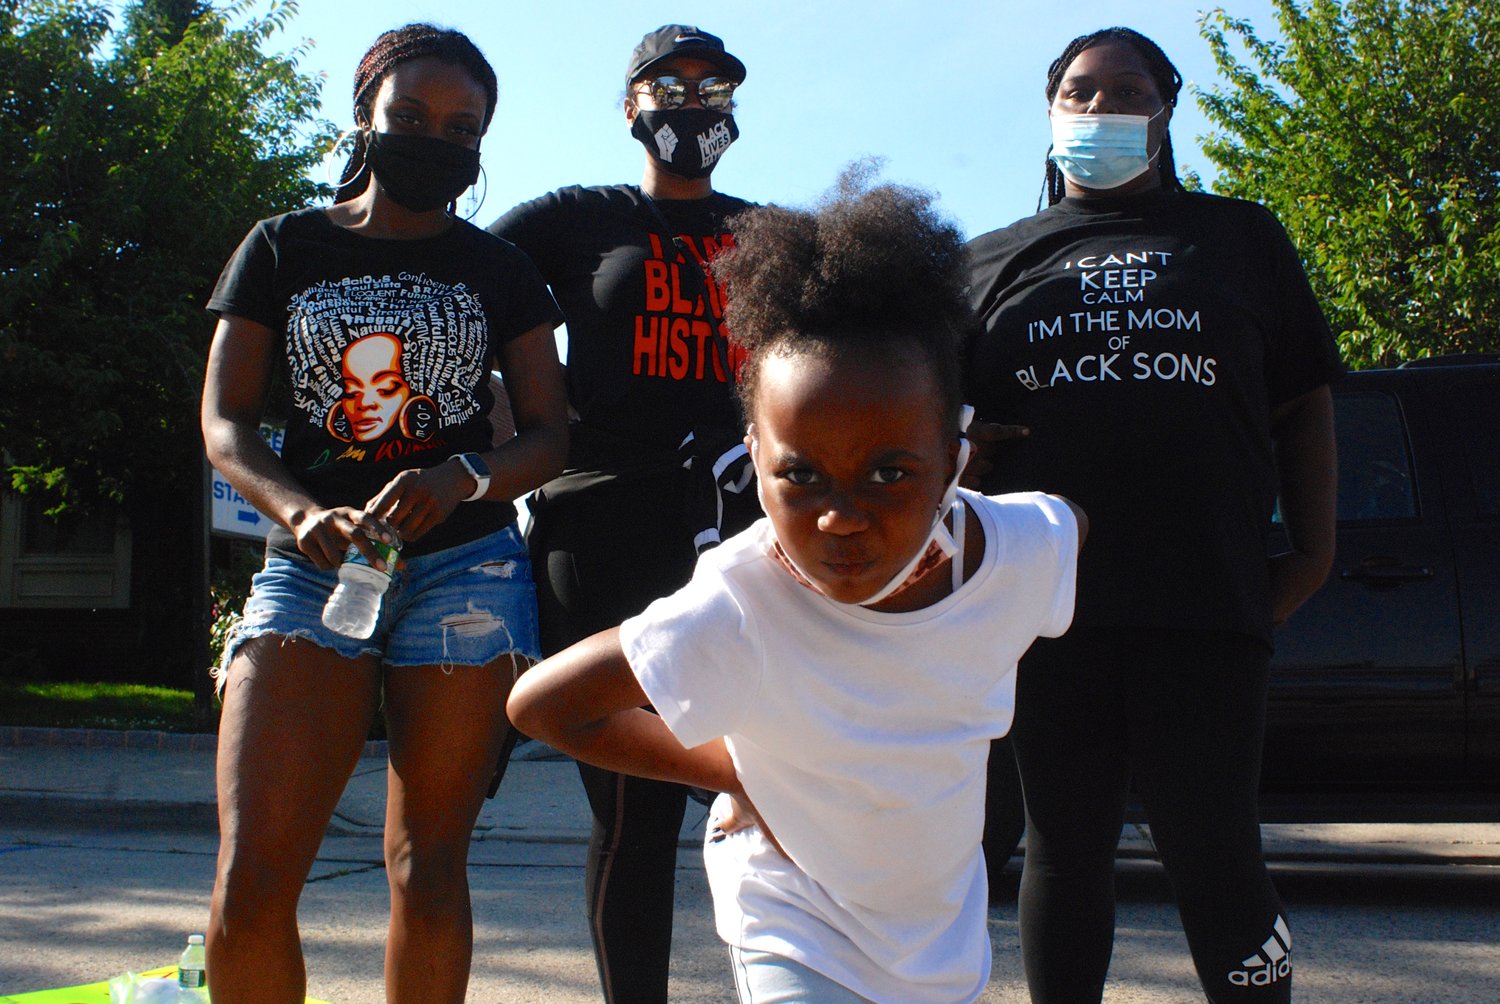 A video posted to Twitter of 7-year-old Wynta-Amor Rogers, front, of Uniondale, protesting in Merrick electrified the Twittersphere on June 2. Since then, she has appeared at Black Lives Matter protest marches throughout the metropolitan area. Above, she was joined by Hempstead protest organizers, from left, Raina Lewis, Tiara Adams and Jada Gillenwater.